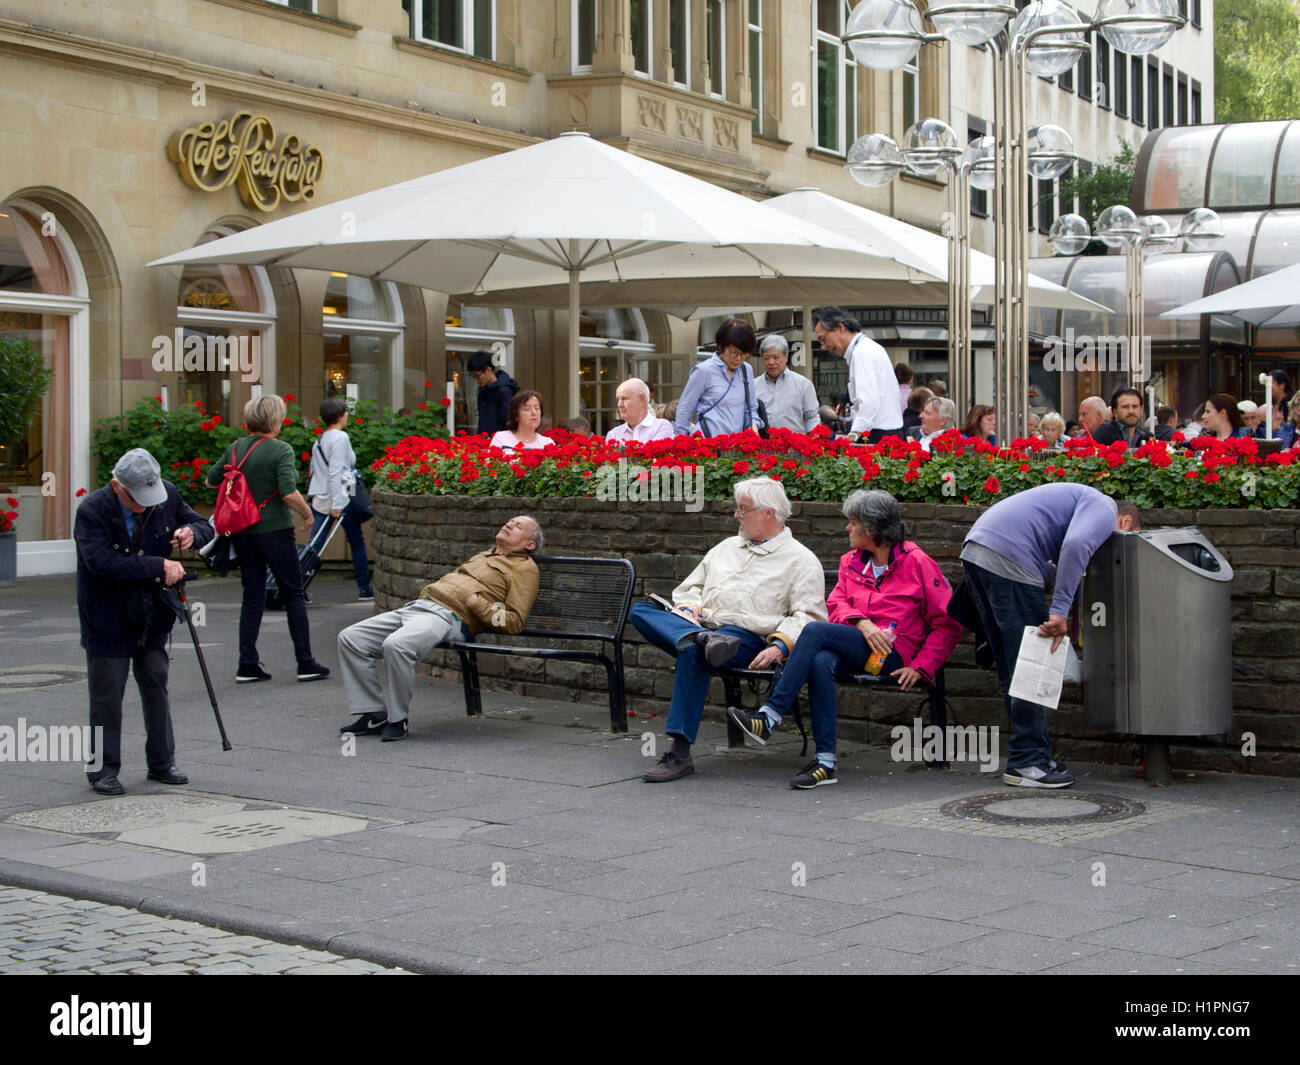 Street scene in the city center of Cologne, Germany, with man sticking his head in a garbage bin. Stock Photo